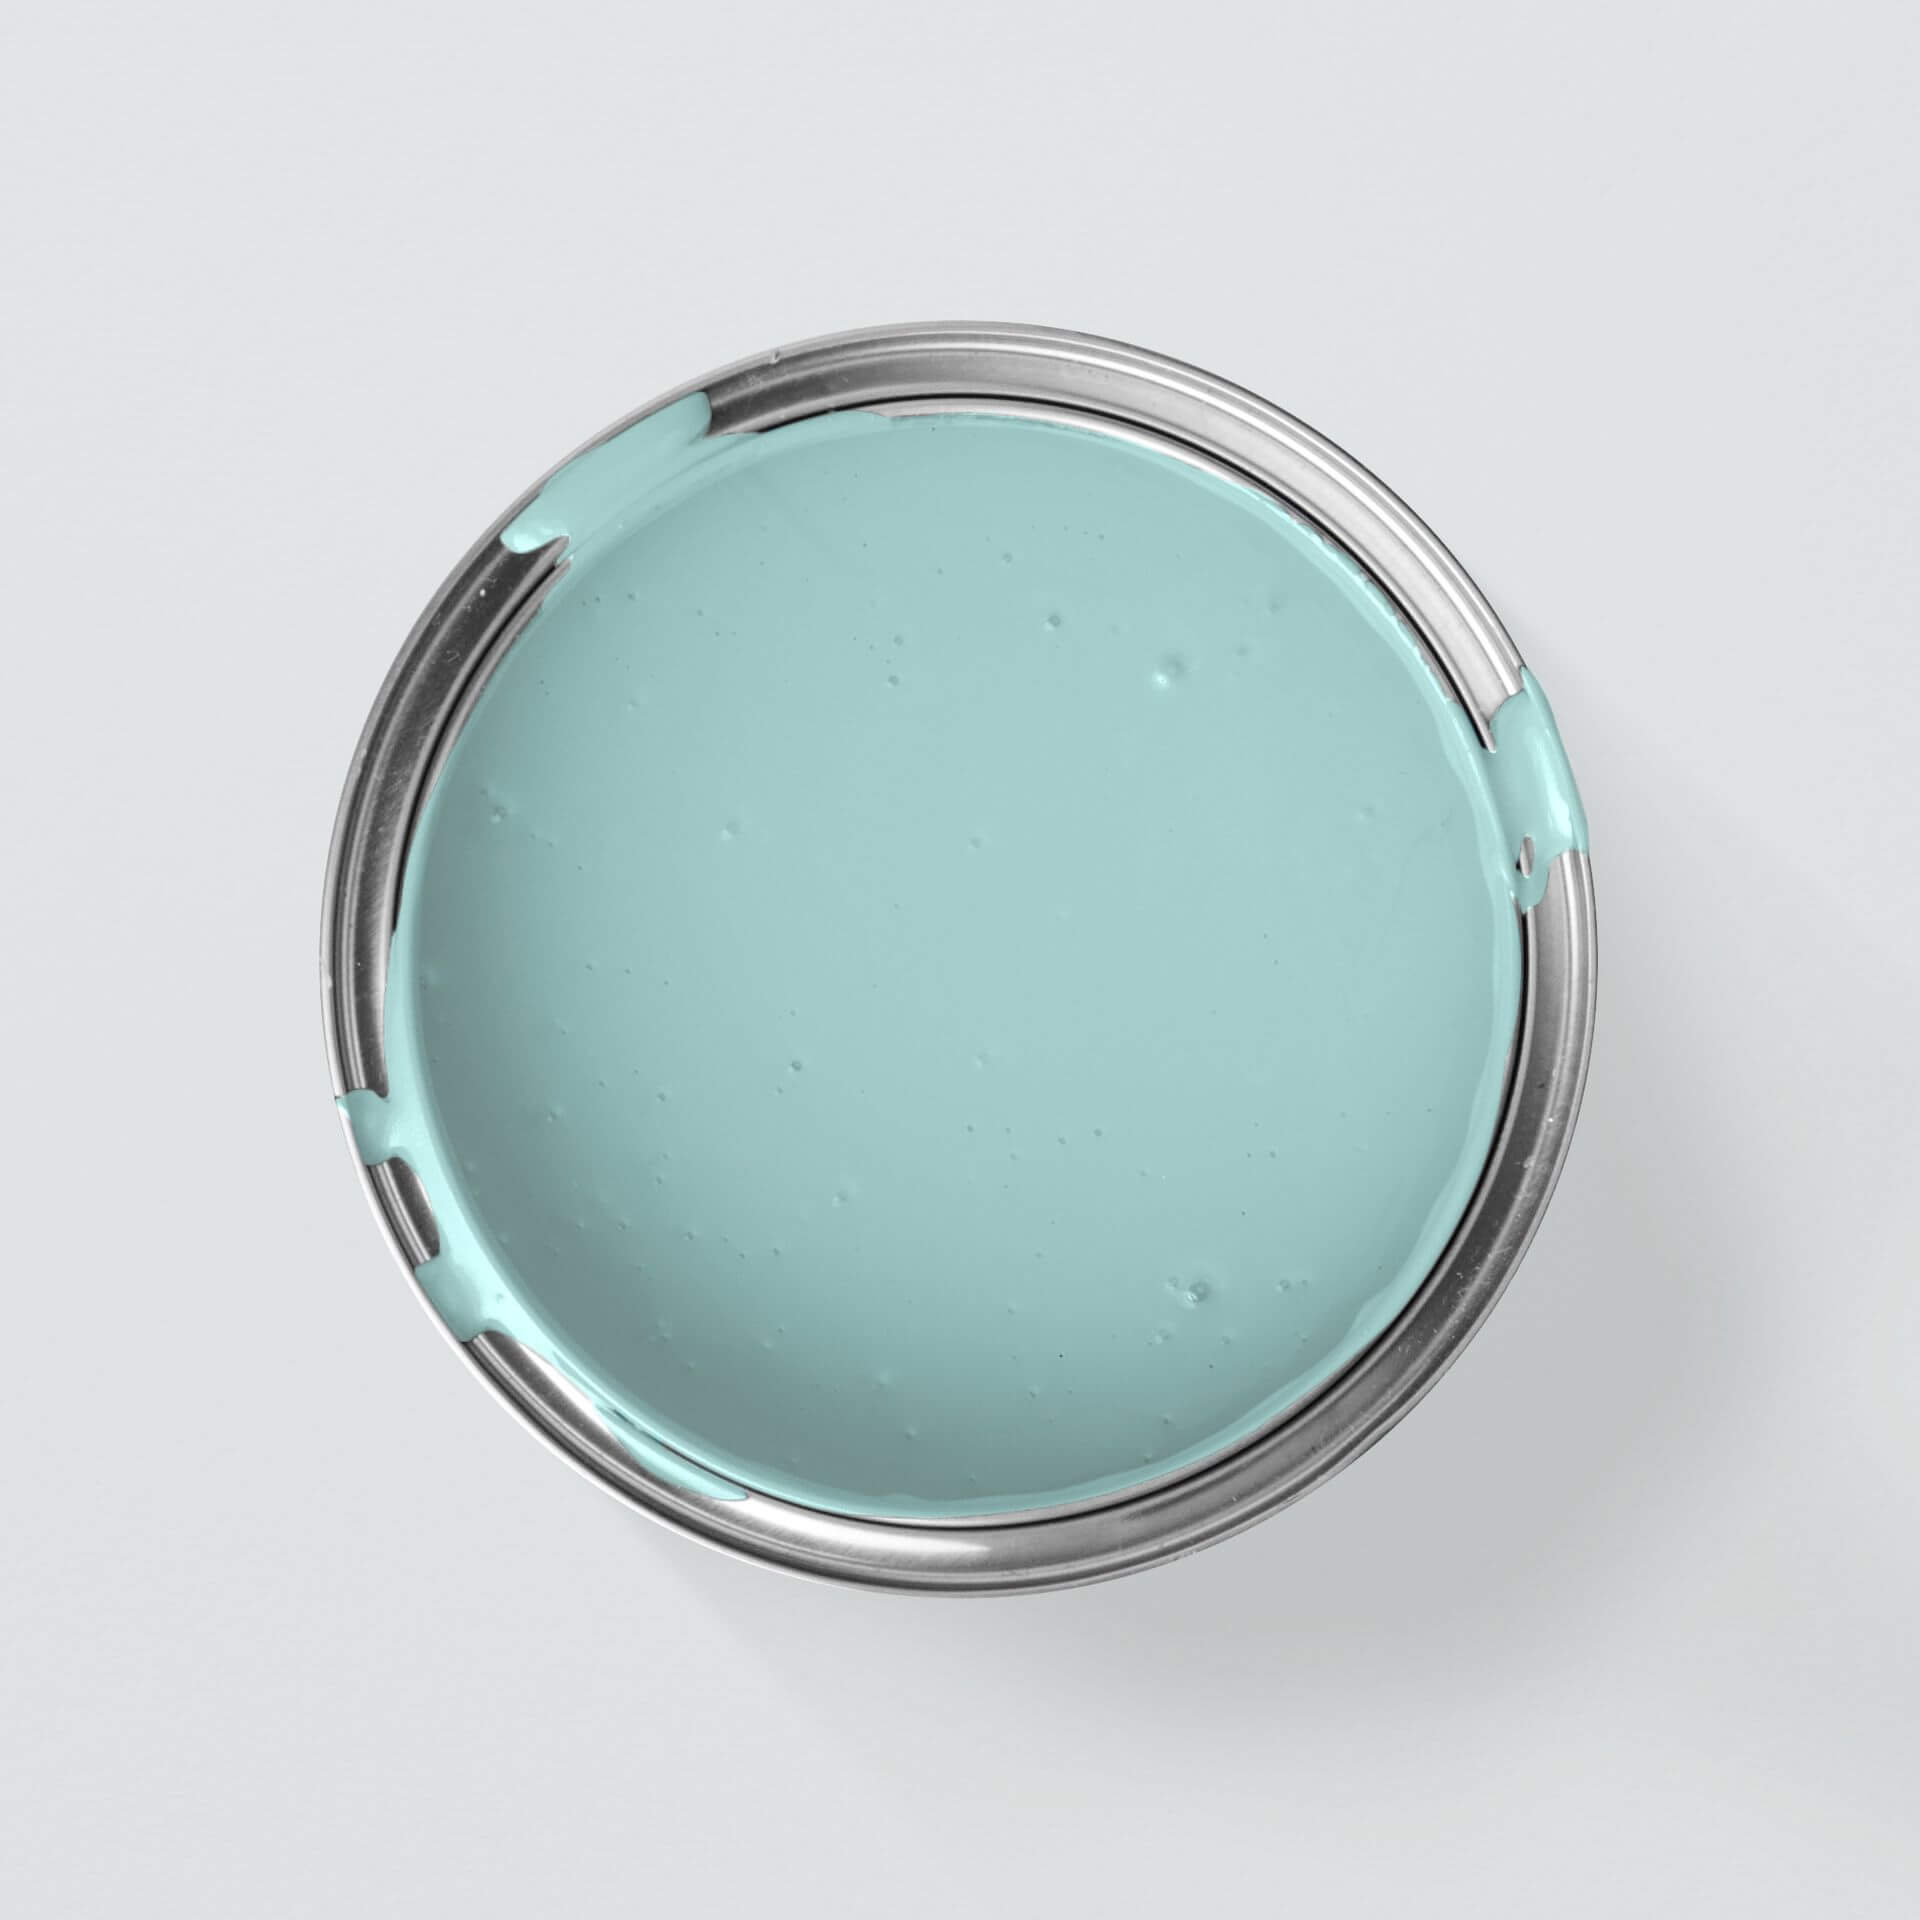 MissPompadour Green with Aqua - The Valuable Wall Paint 1L